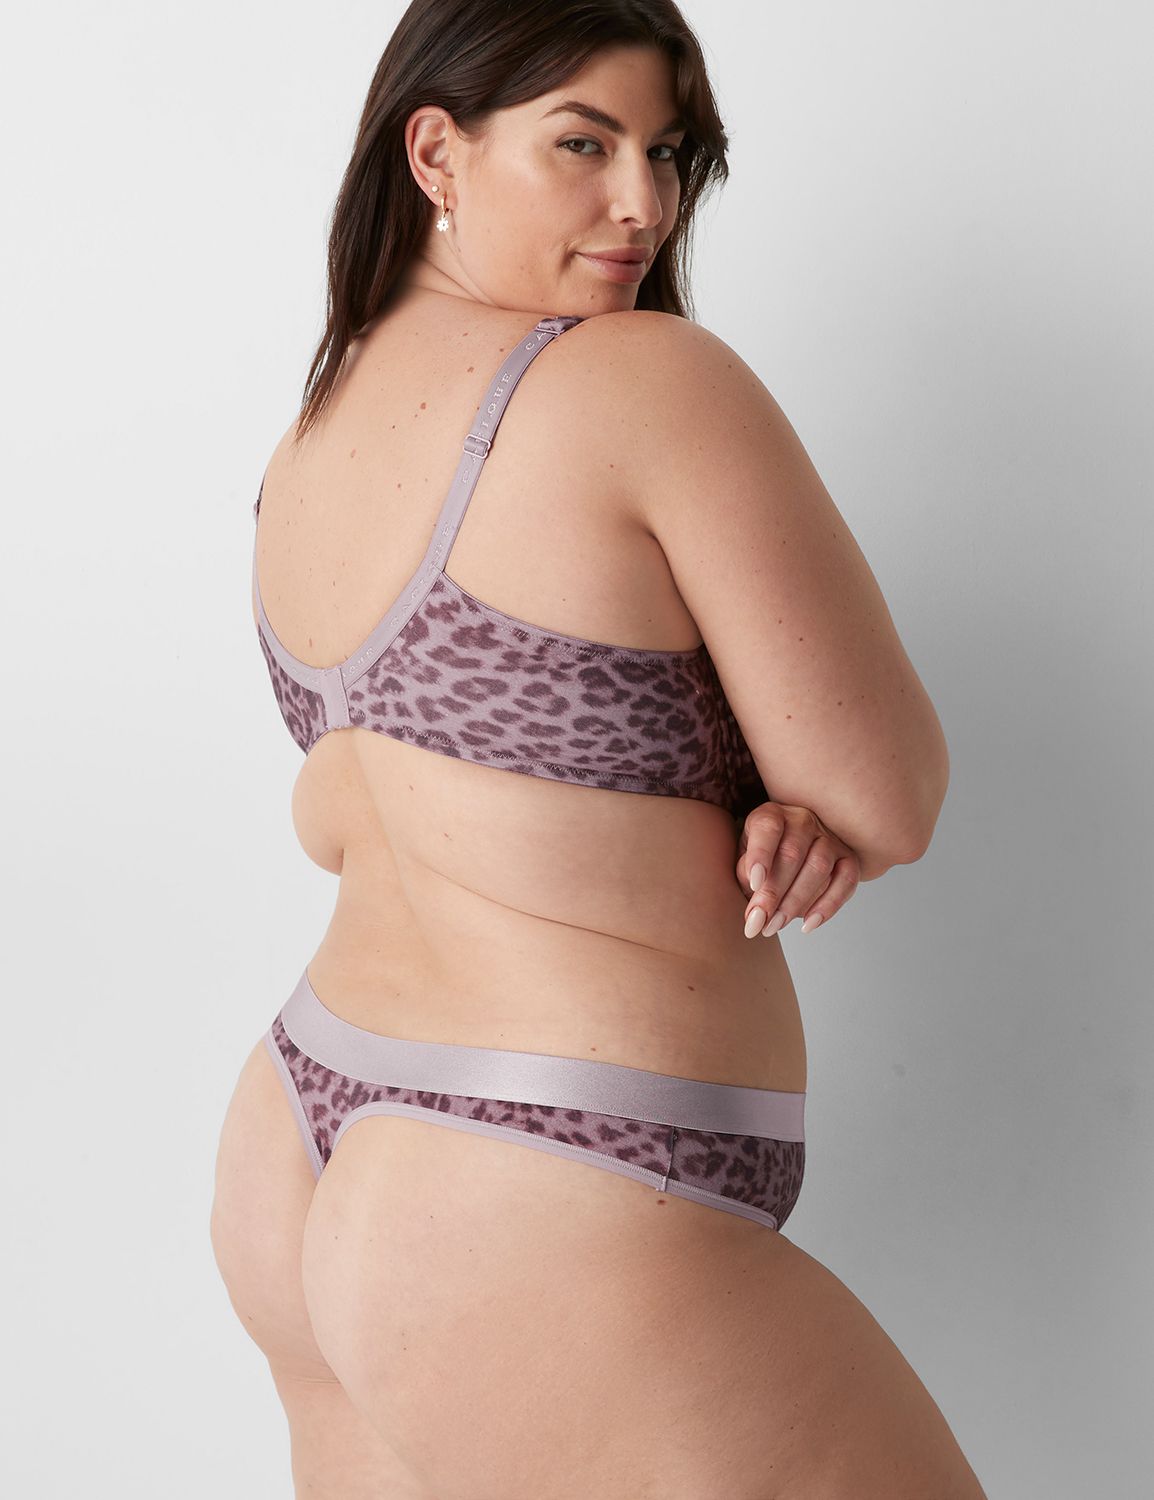 Lane Bryant - Friend to friend, 7 for $35 panties ends TODAY & we